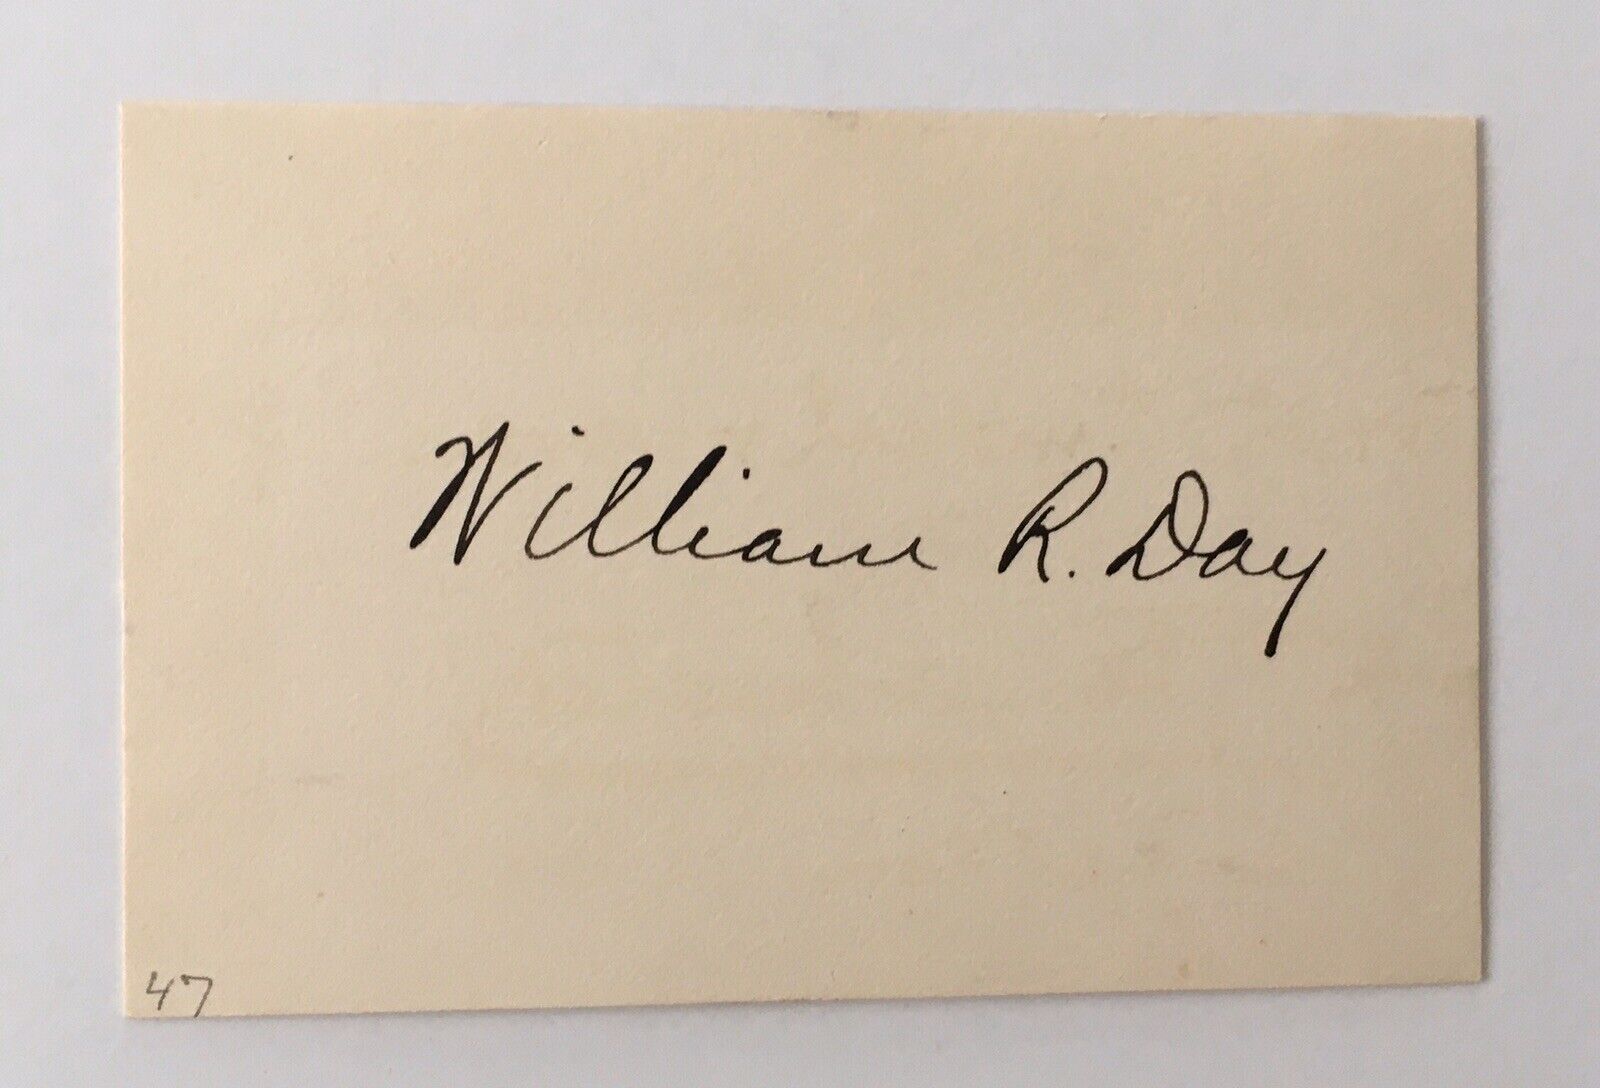 William R. Day Signed Autographed 2.5 X 3.5 Card Full JSA Letter Supreme Court